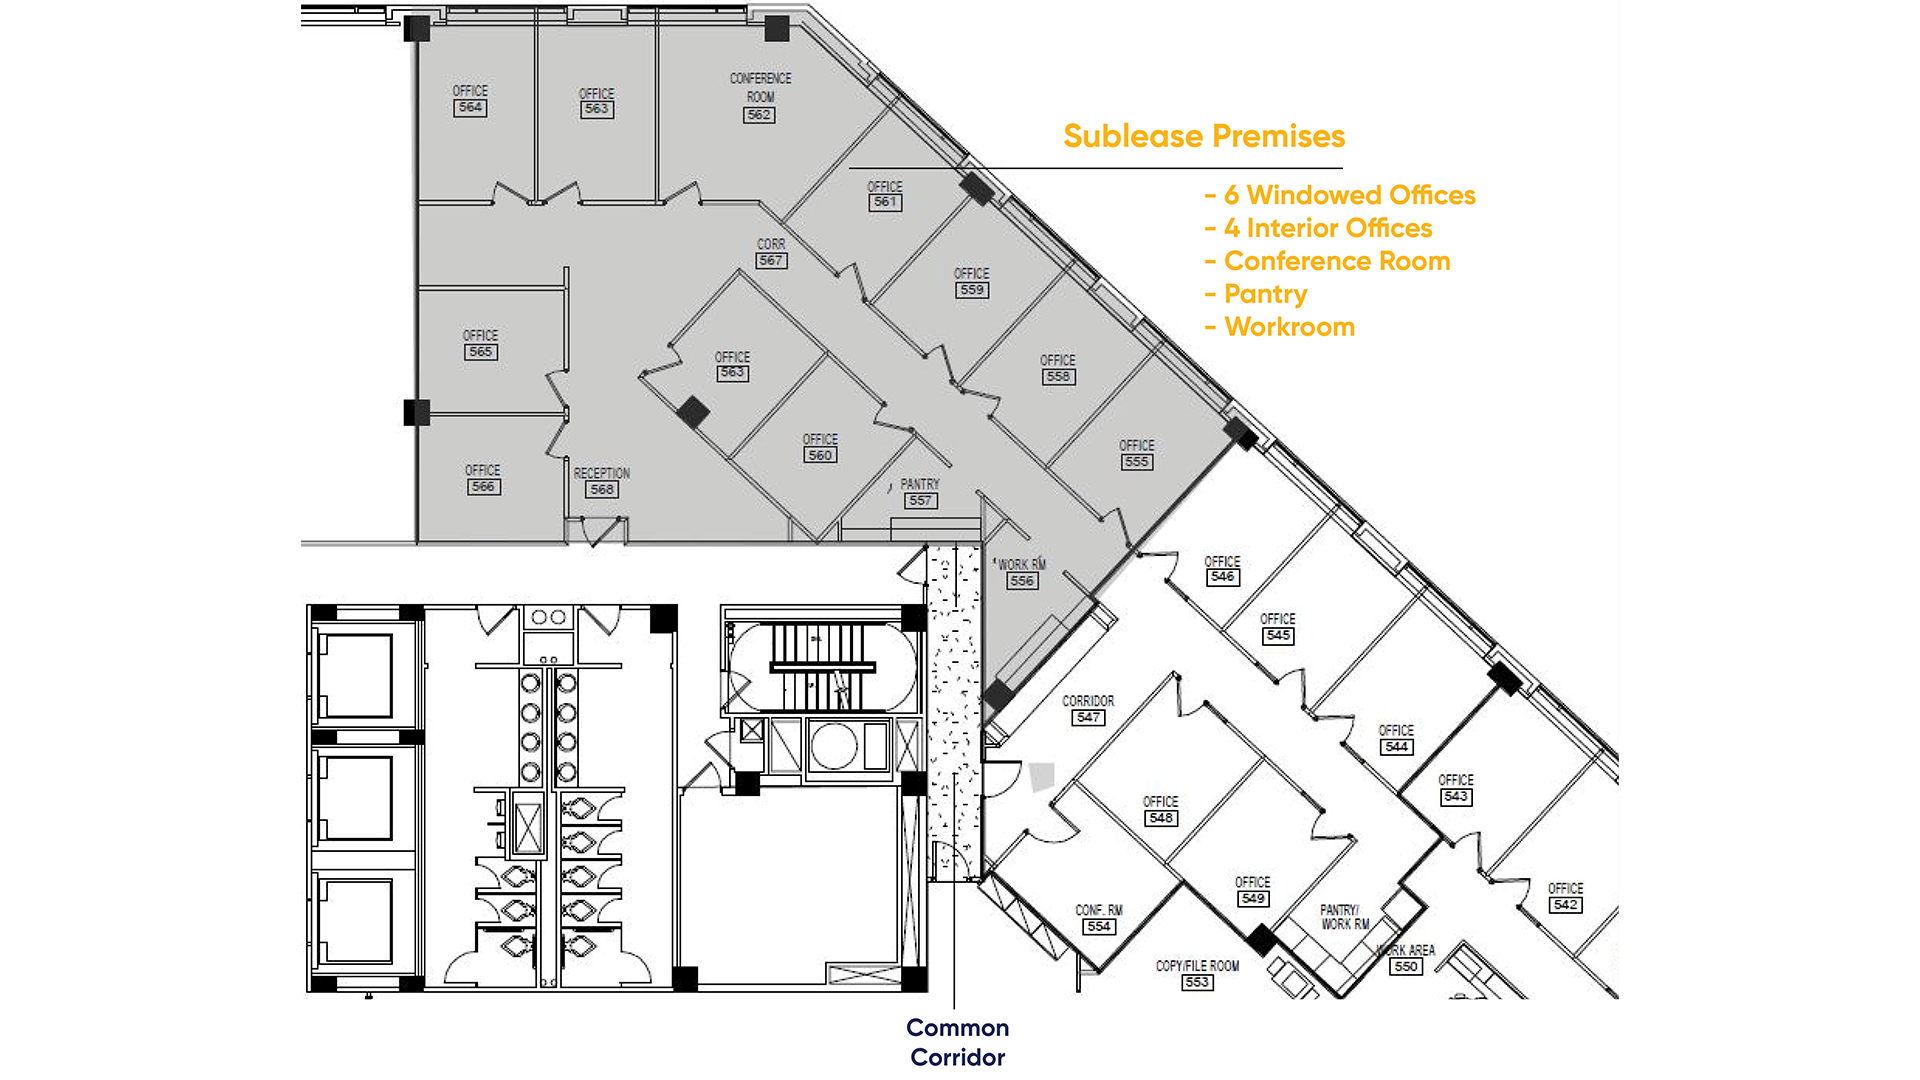 101 Constitution Ave NW - floor plan